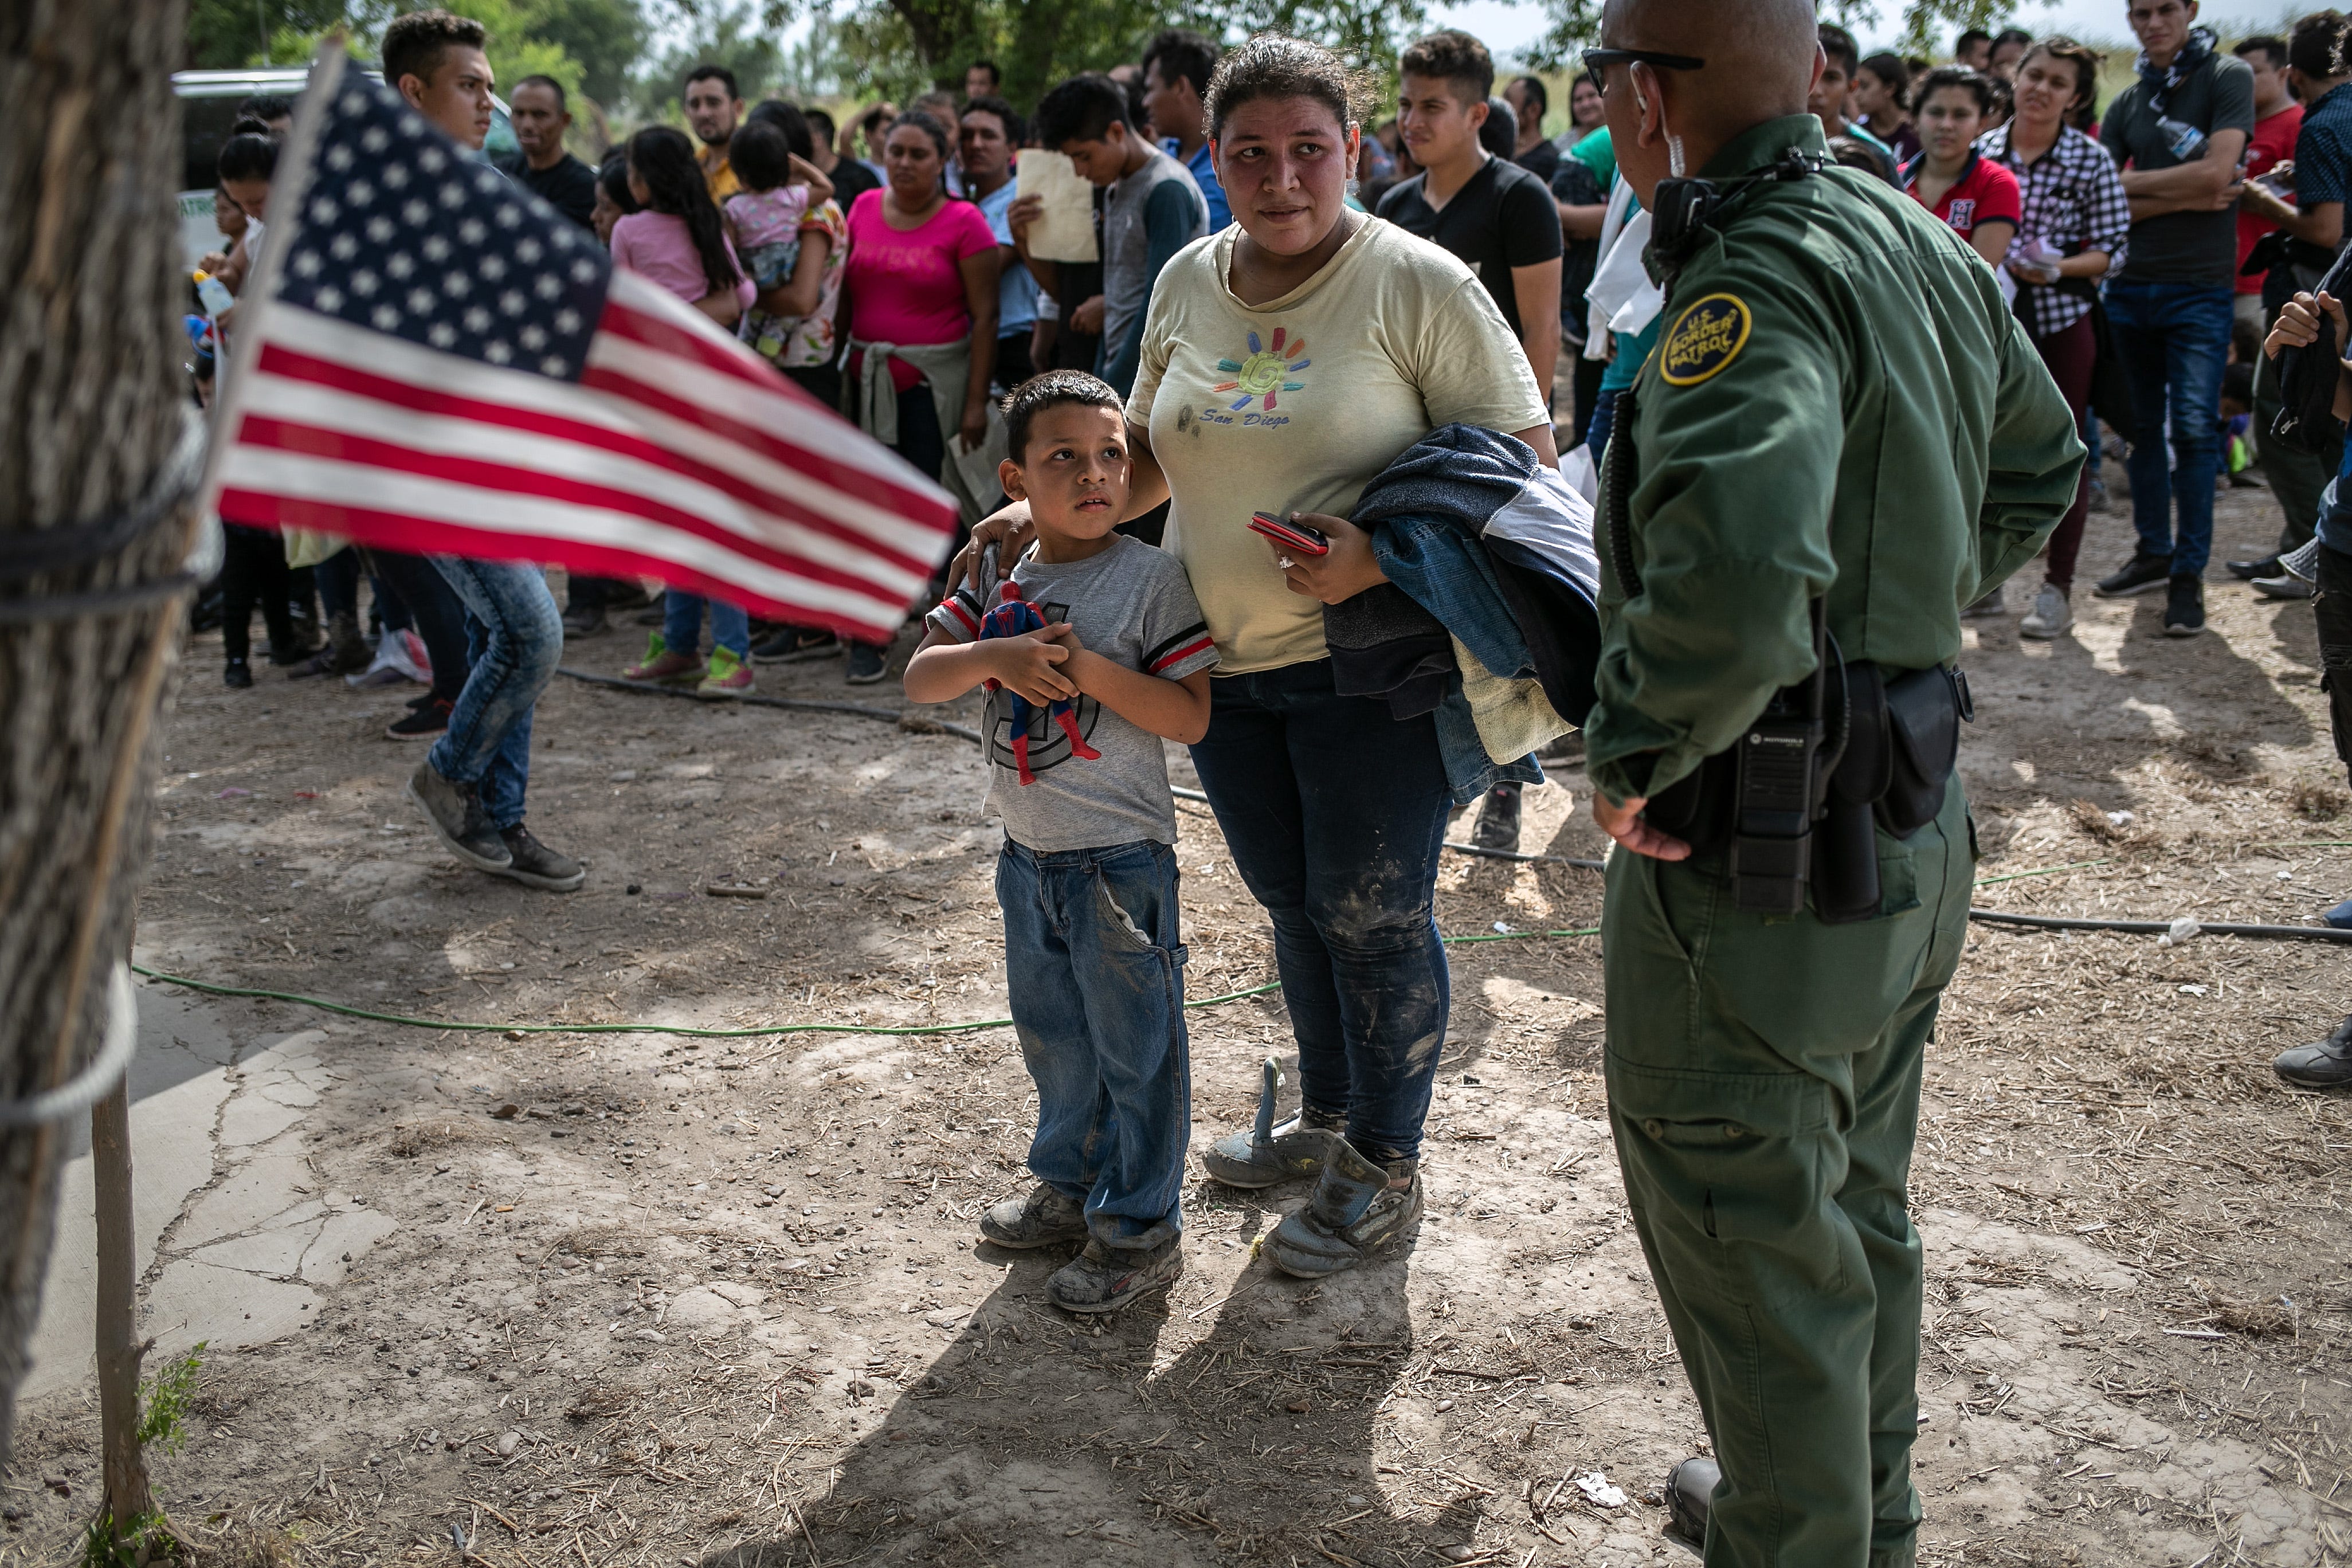 A U.S. Border Patrol agent speaks to immigrants after taking them into custody on July 02, 2019, in Los Ebanos, Texas. Hundreds of immigrants, most from Central America, turned themselves in to border agents after rafting across the Rio Grande from Mexico to seek asylum in the United States.